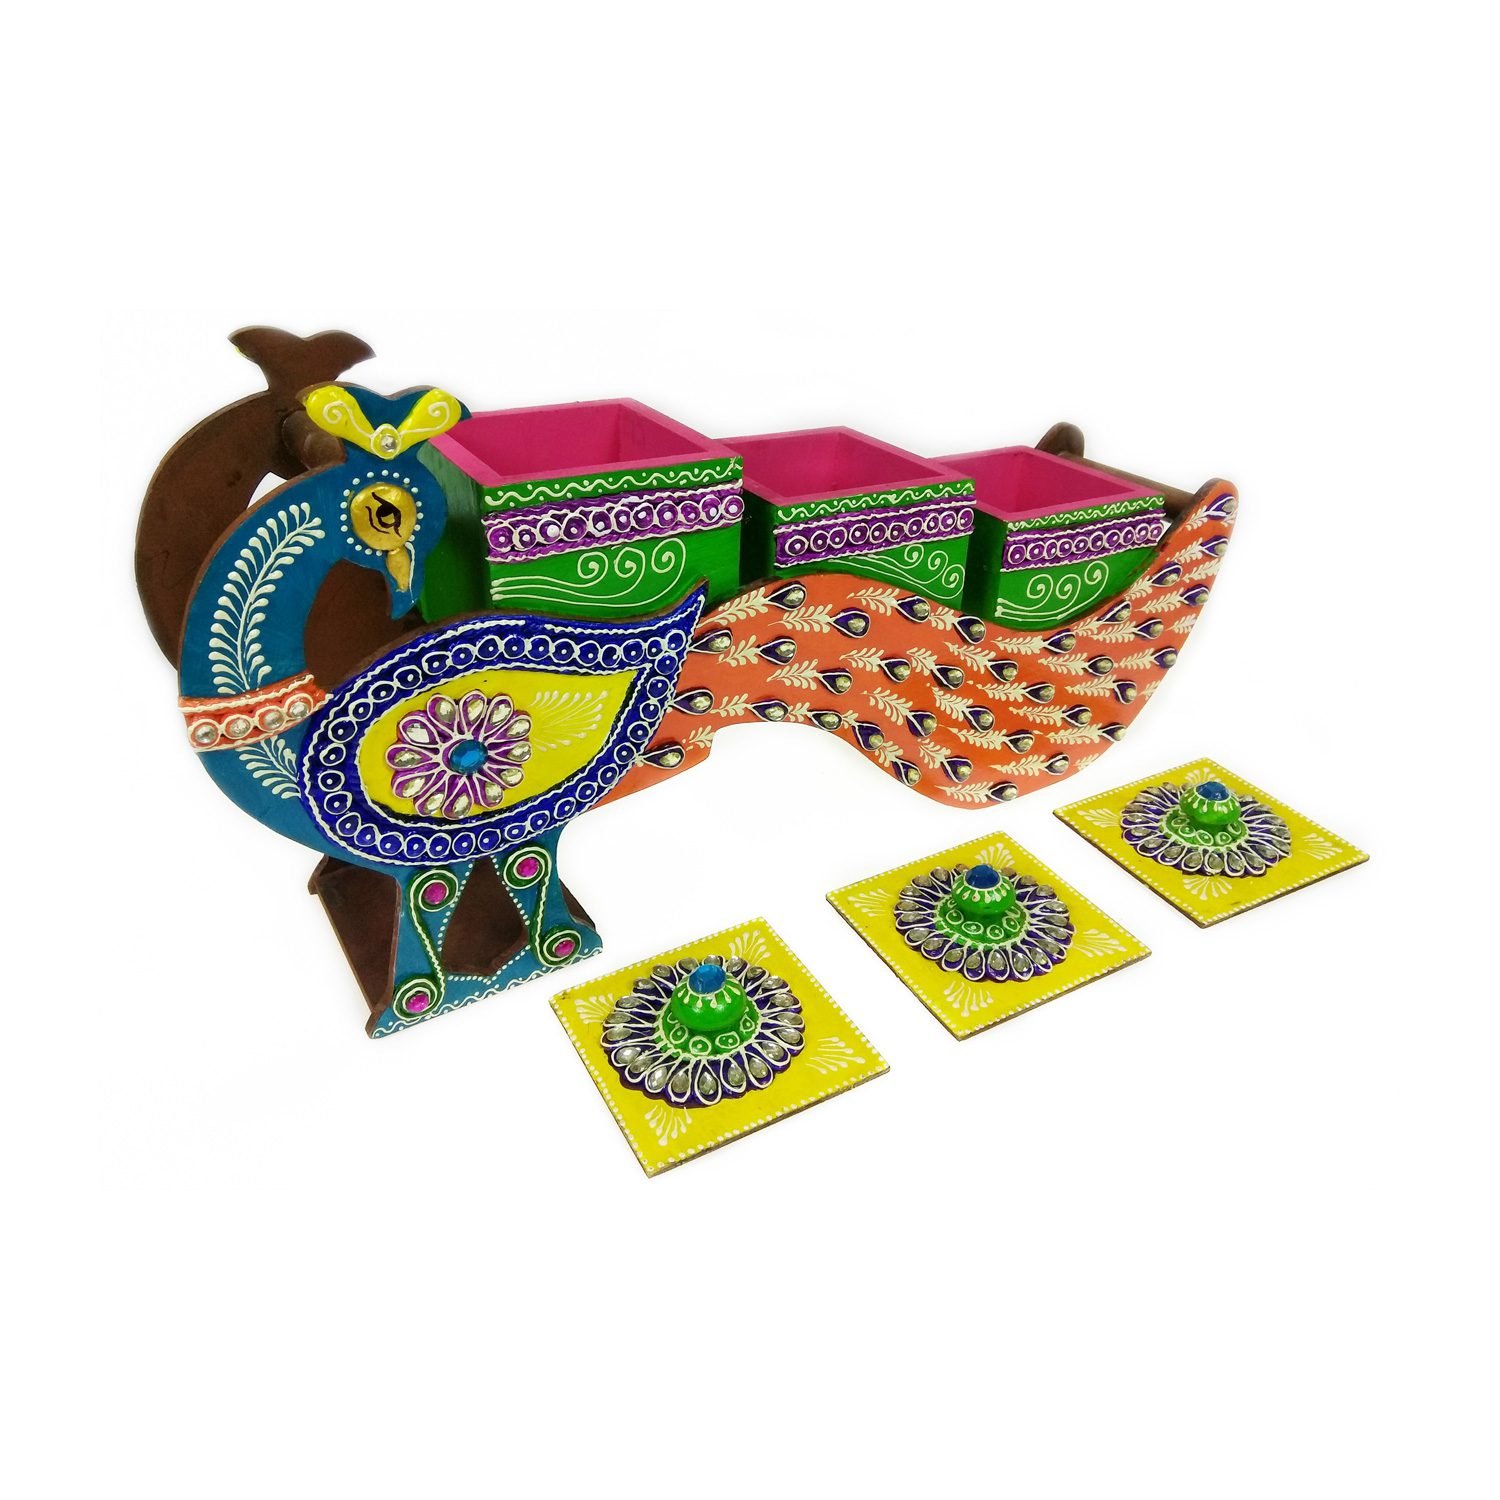 Peacock Dry Fruit Box with 4 spacious containers